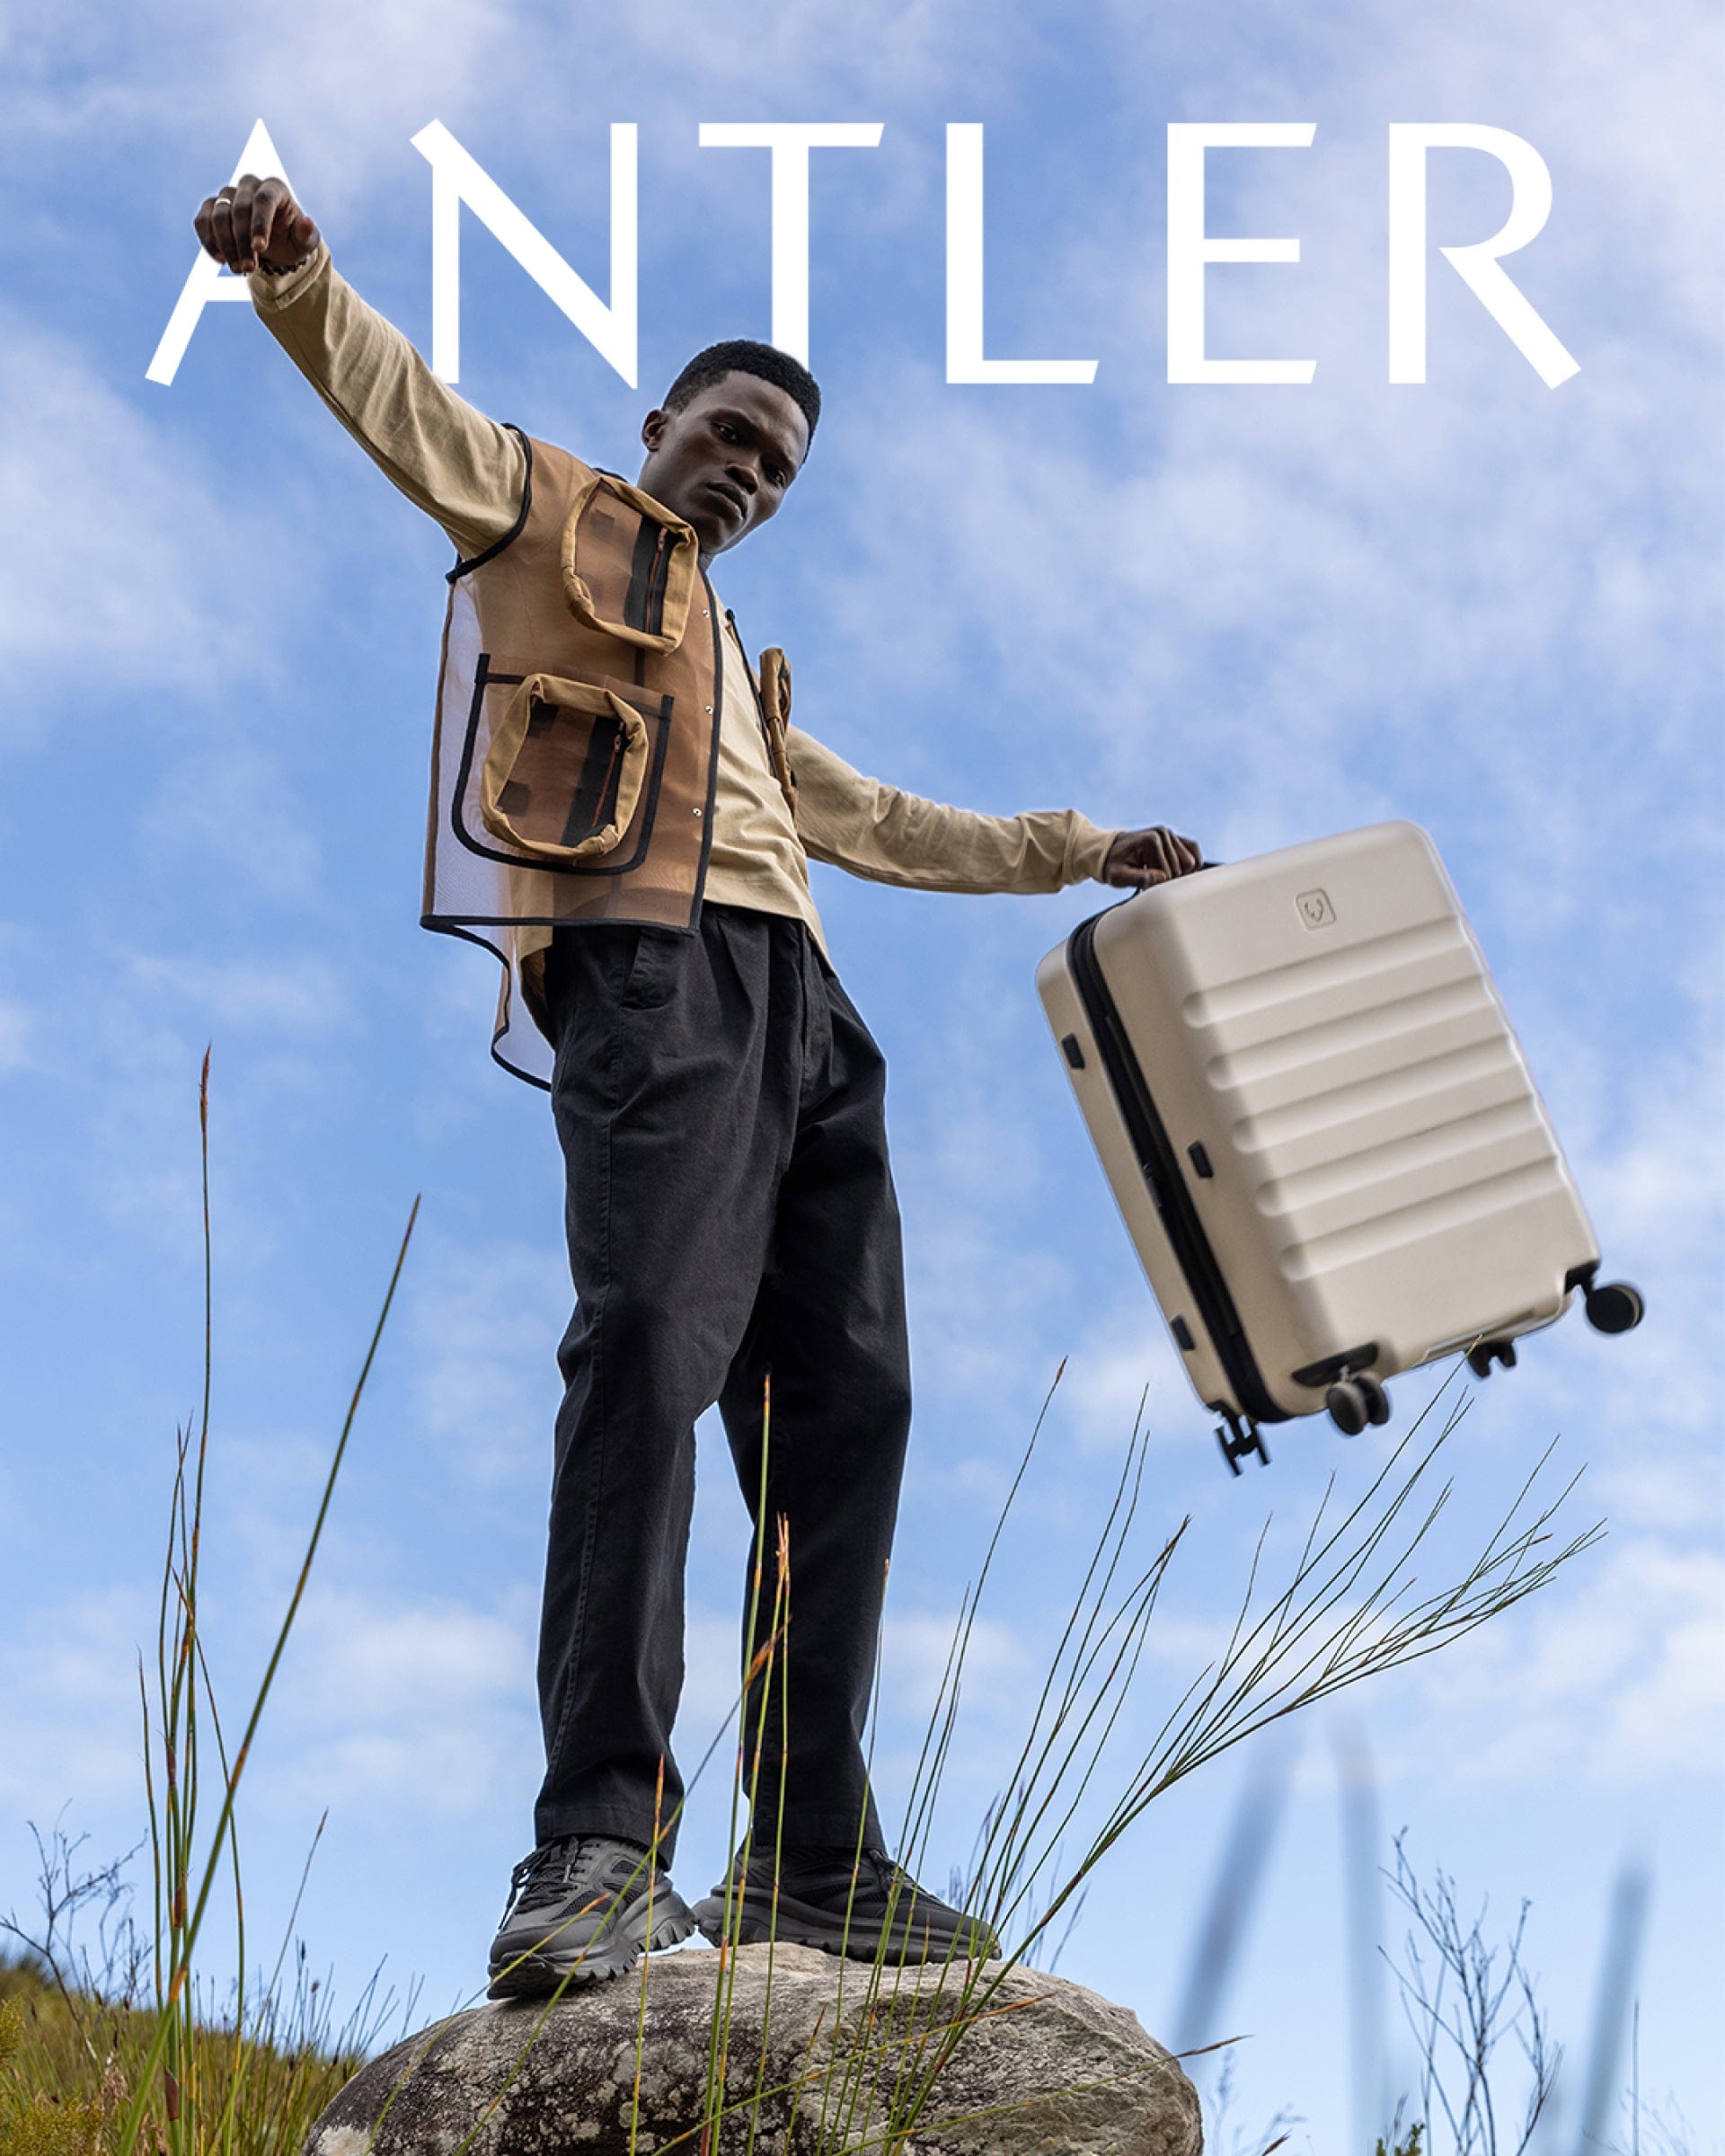 Antler UK Luggage -  Copy of Christmas Delivery - featured